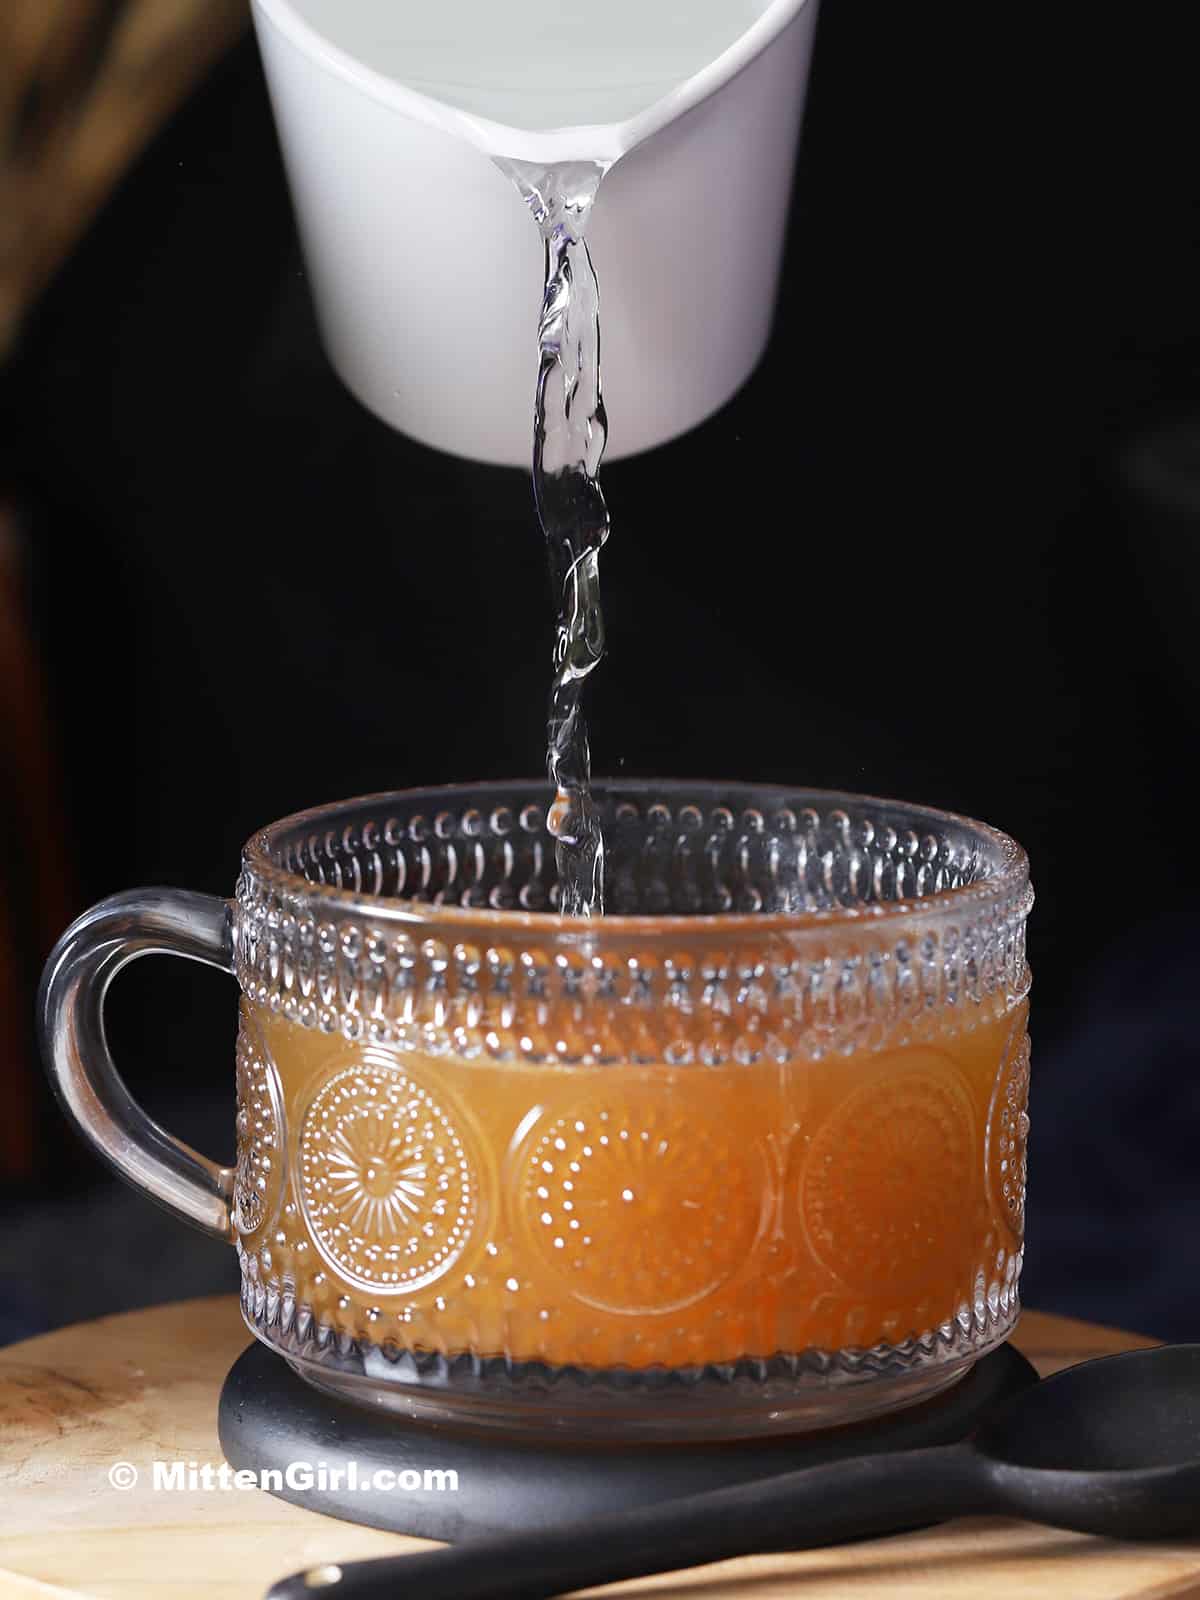 Hot water being poured into a mug.